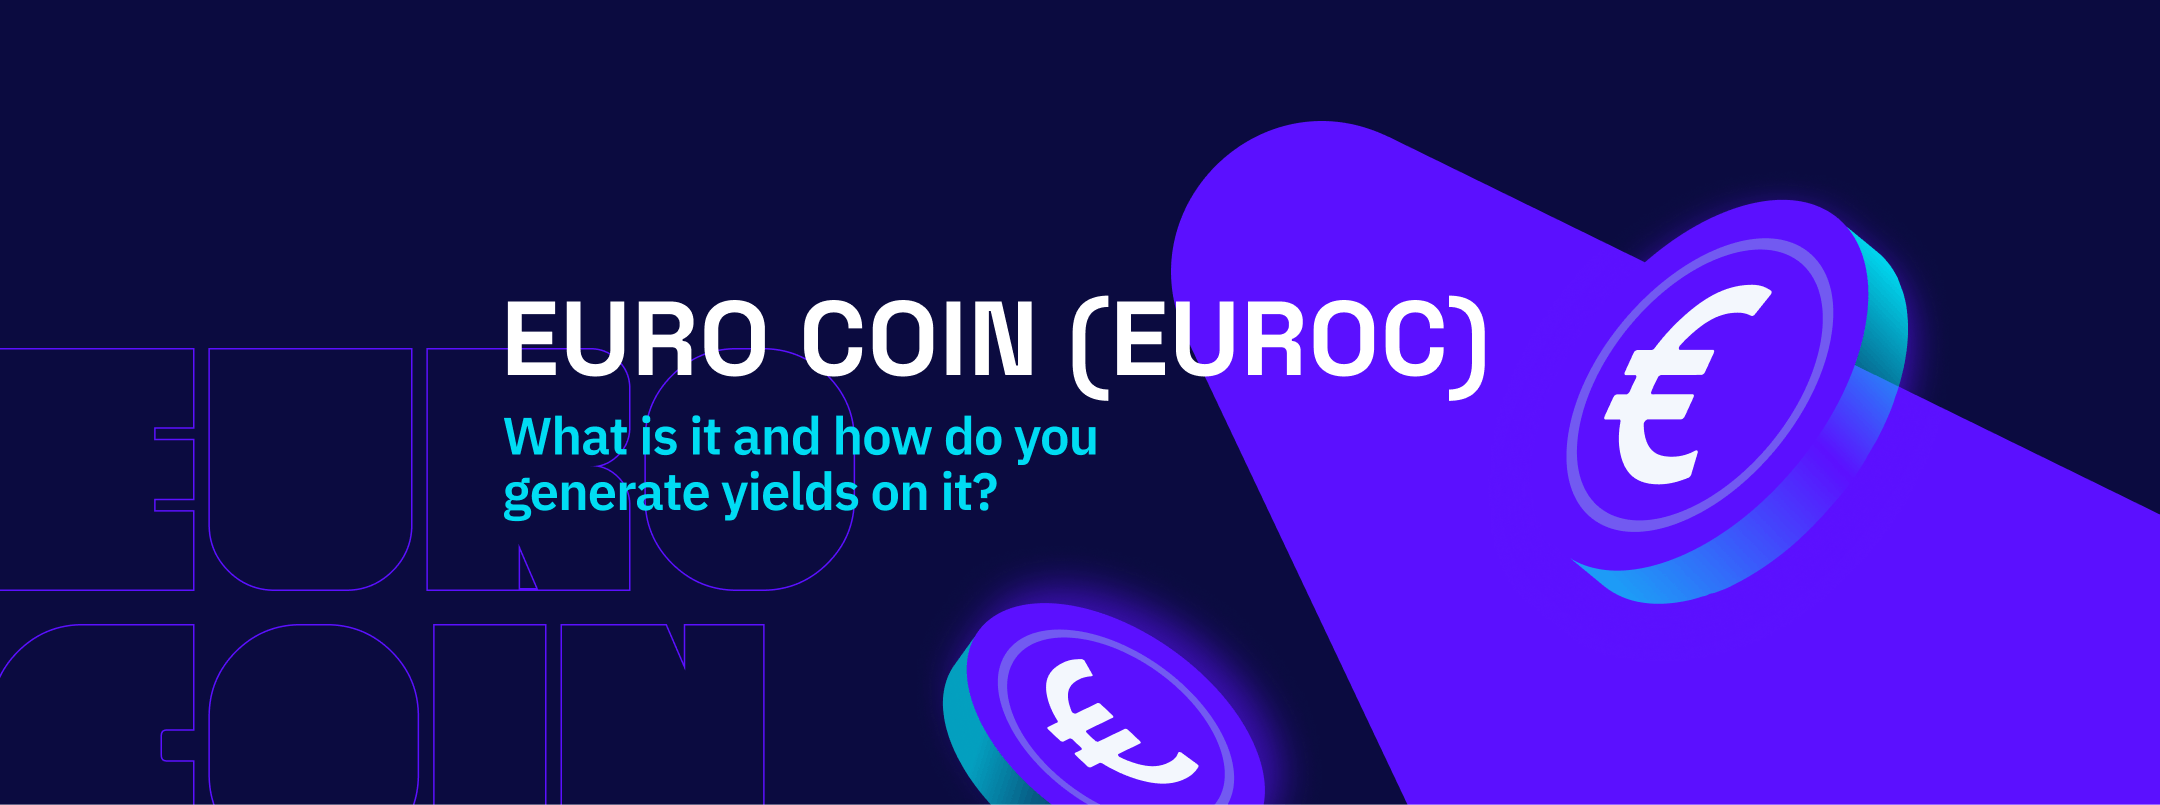 Euro Coin (EUROC): What Is It and How Do You Generate Yields on It?